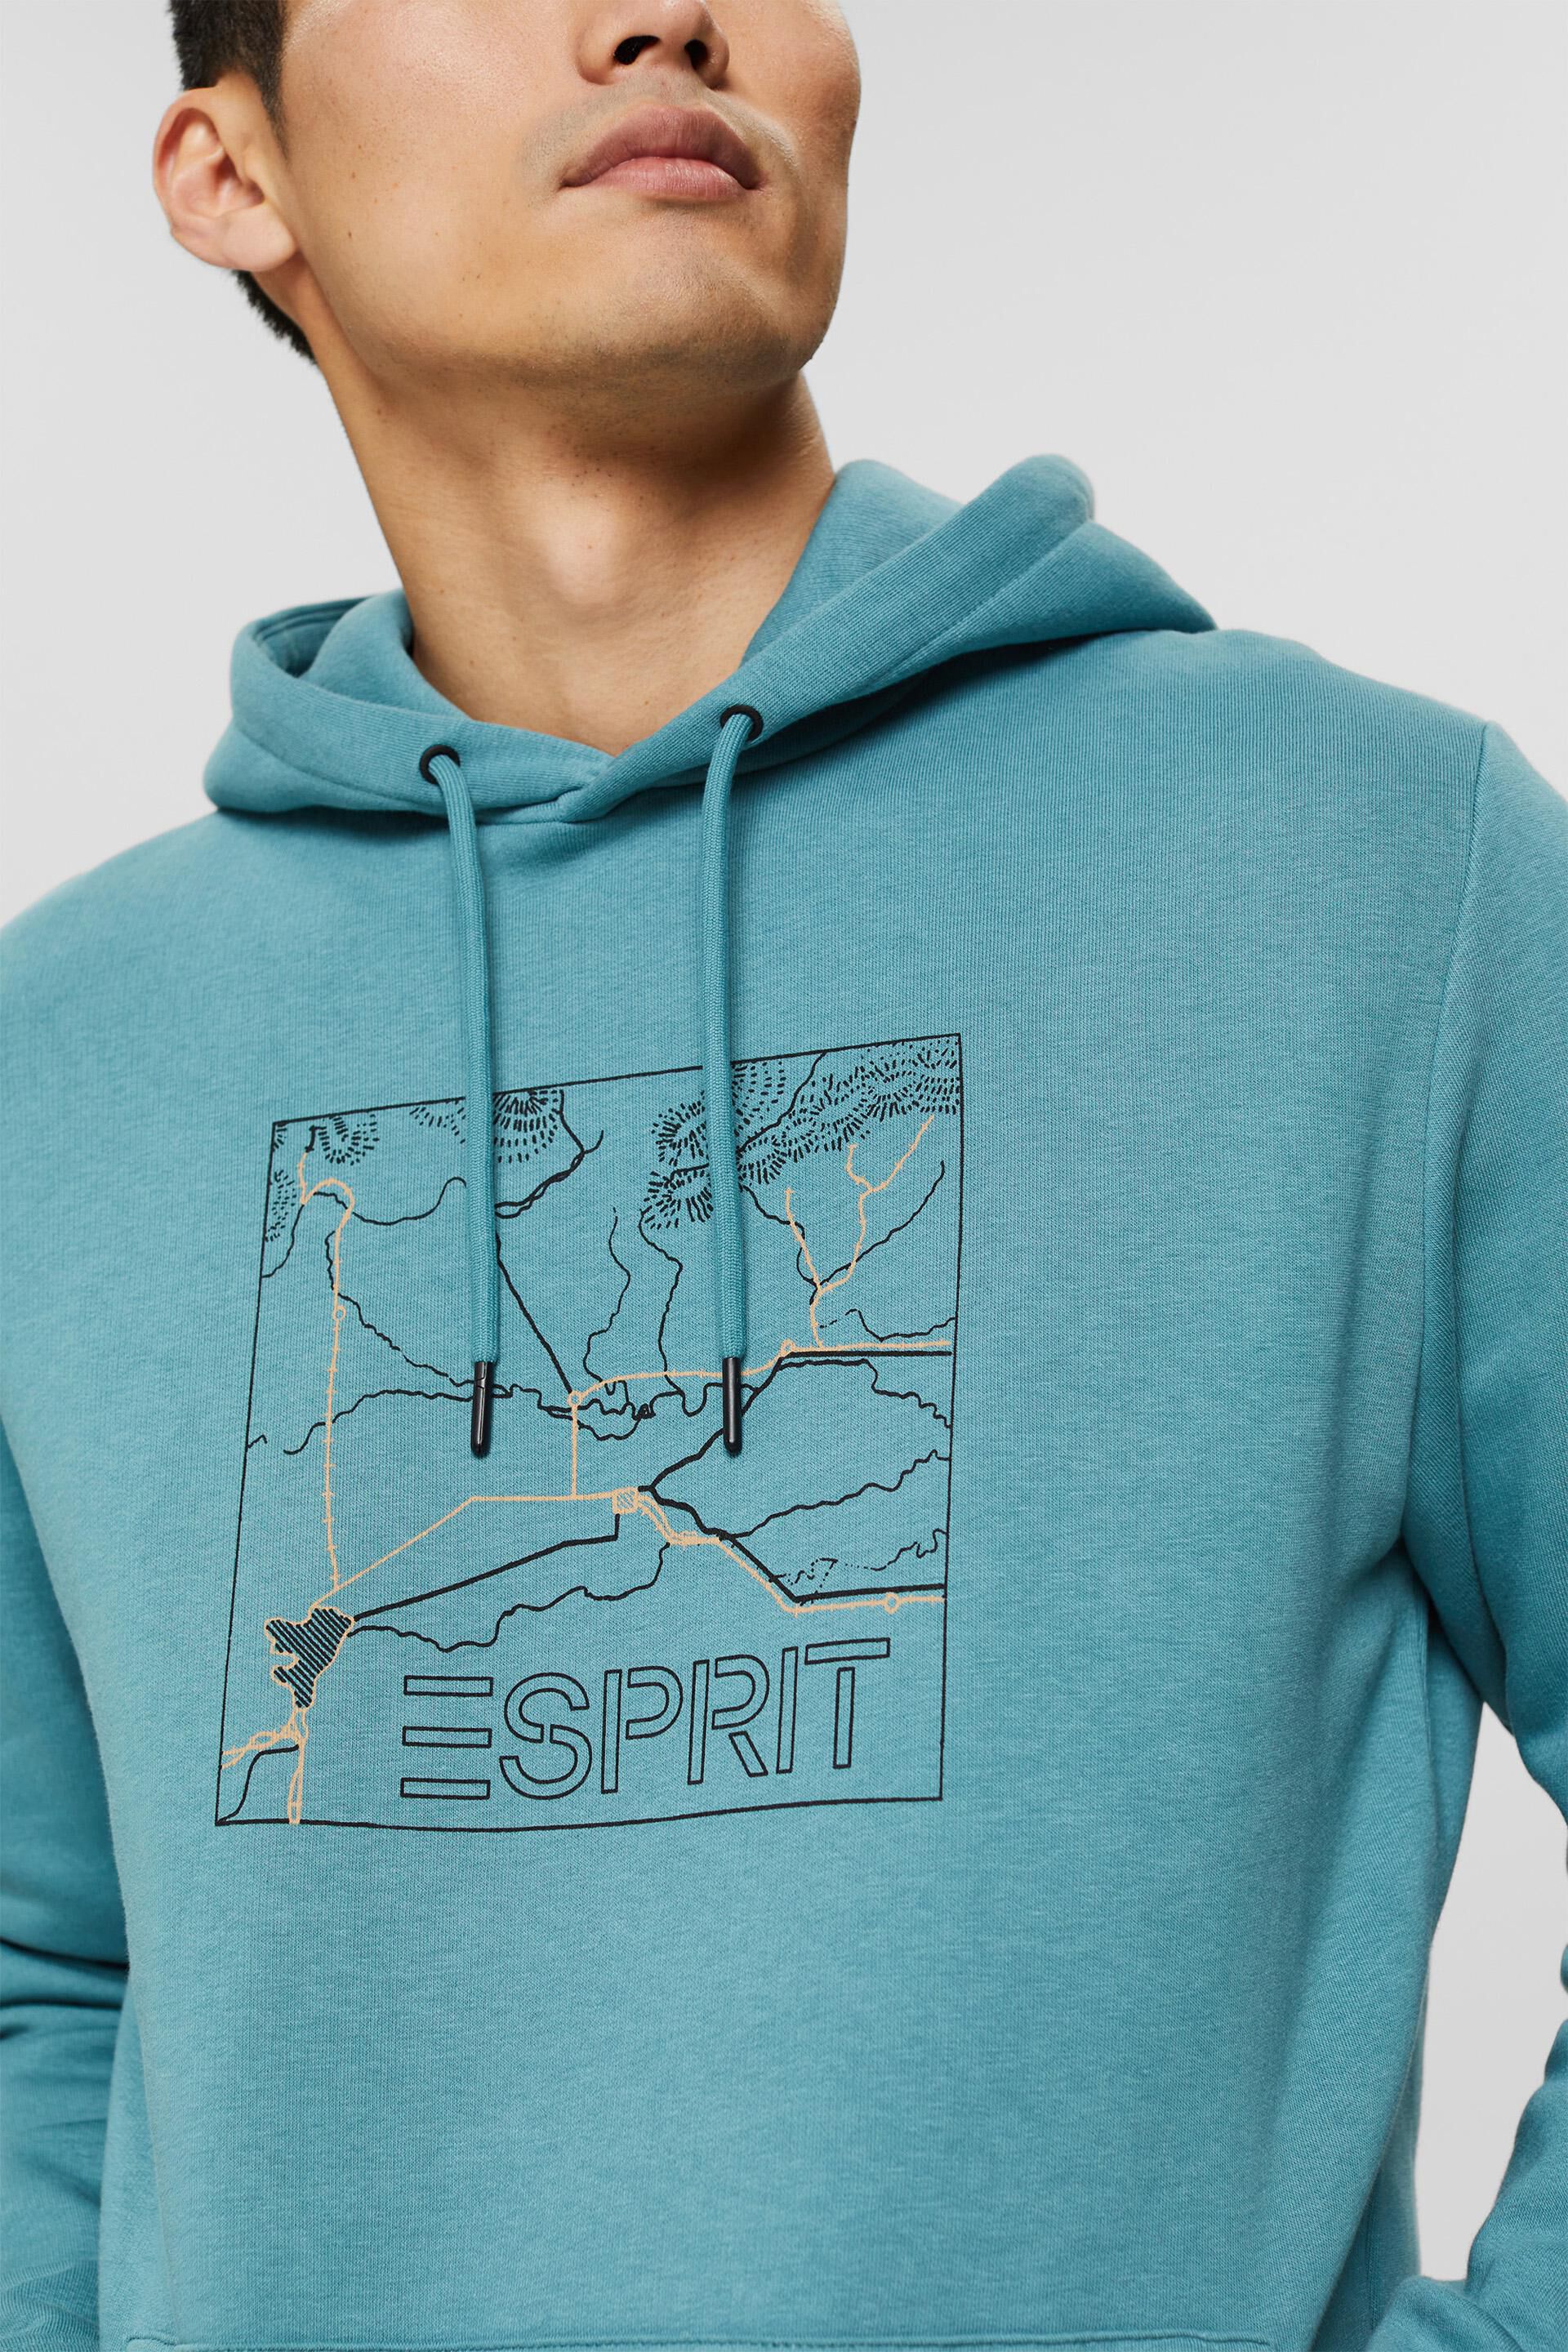 Esprit hoodie of material: recycled Made print with sweatshirt